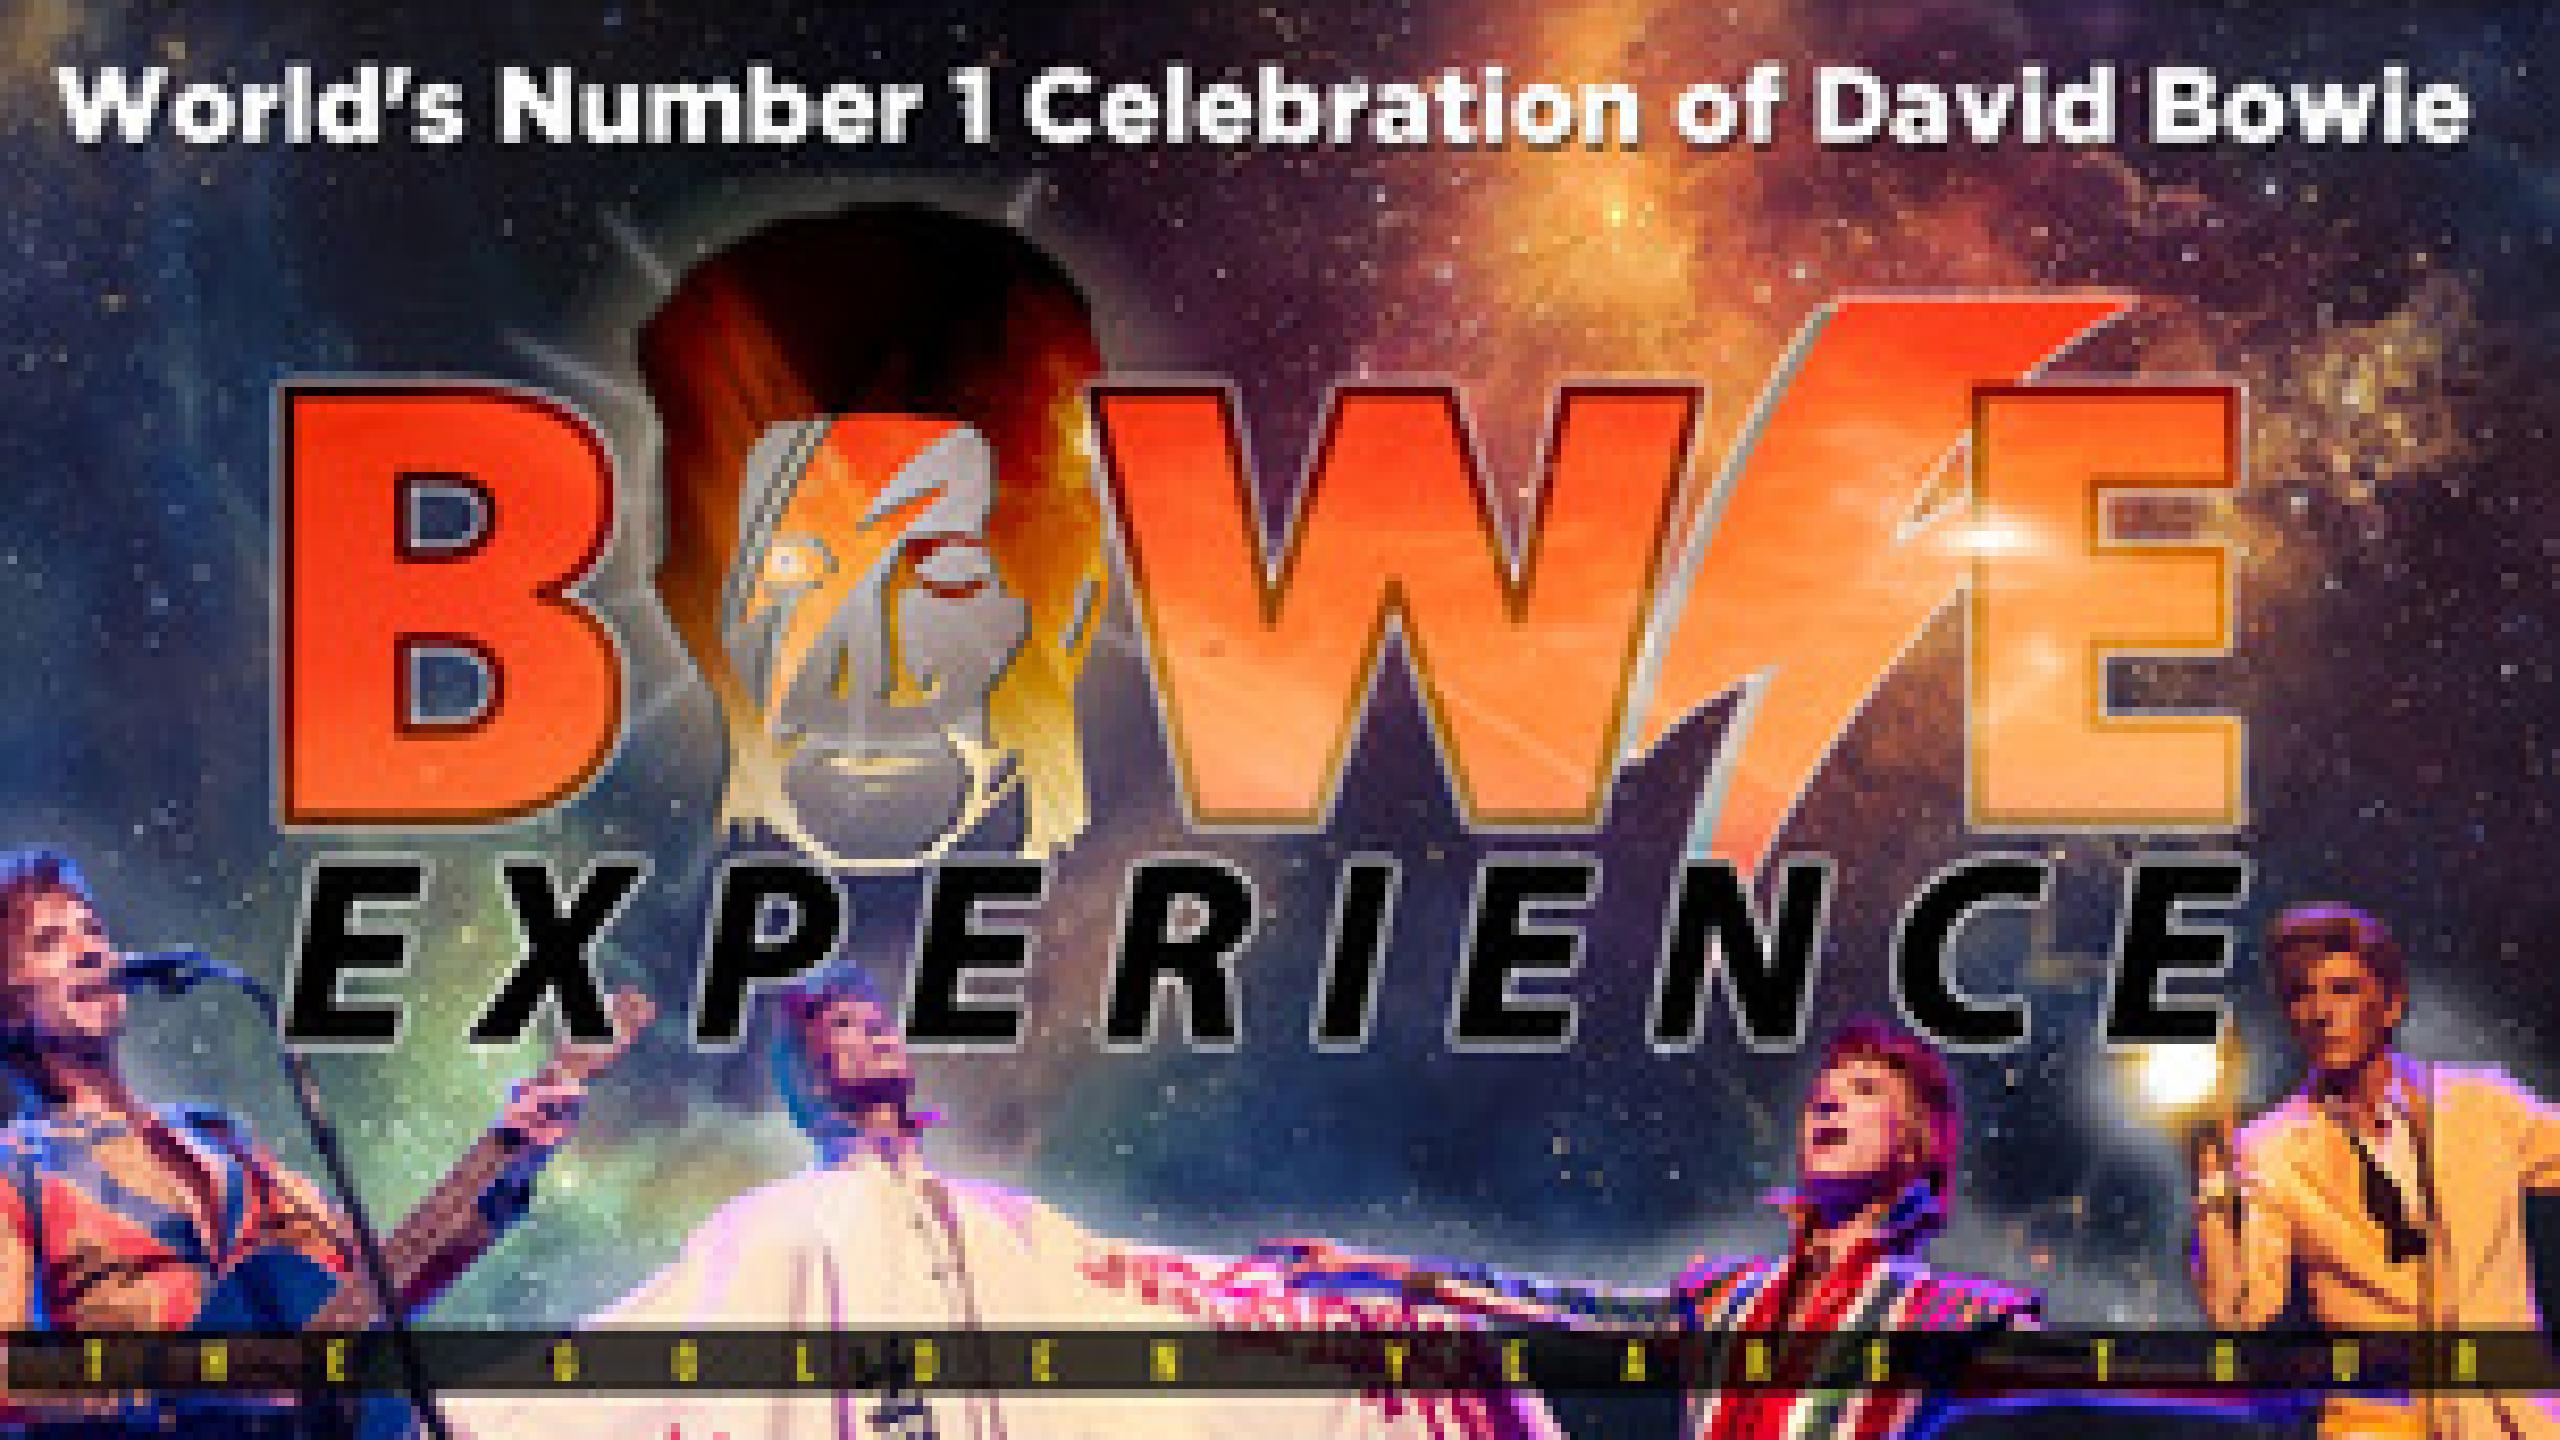 the bowie experience tour